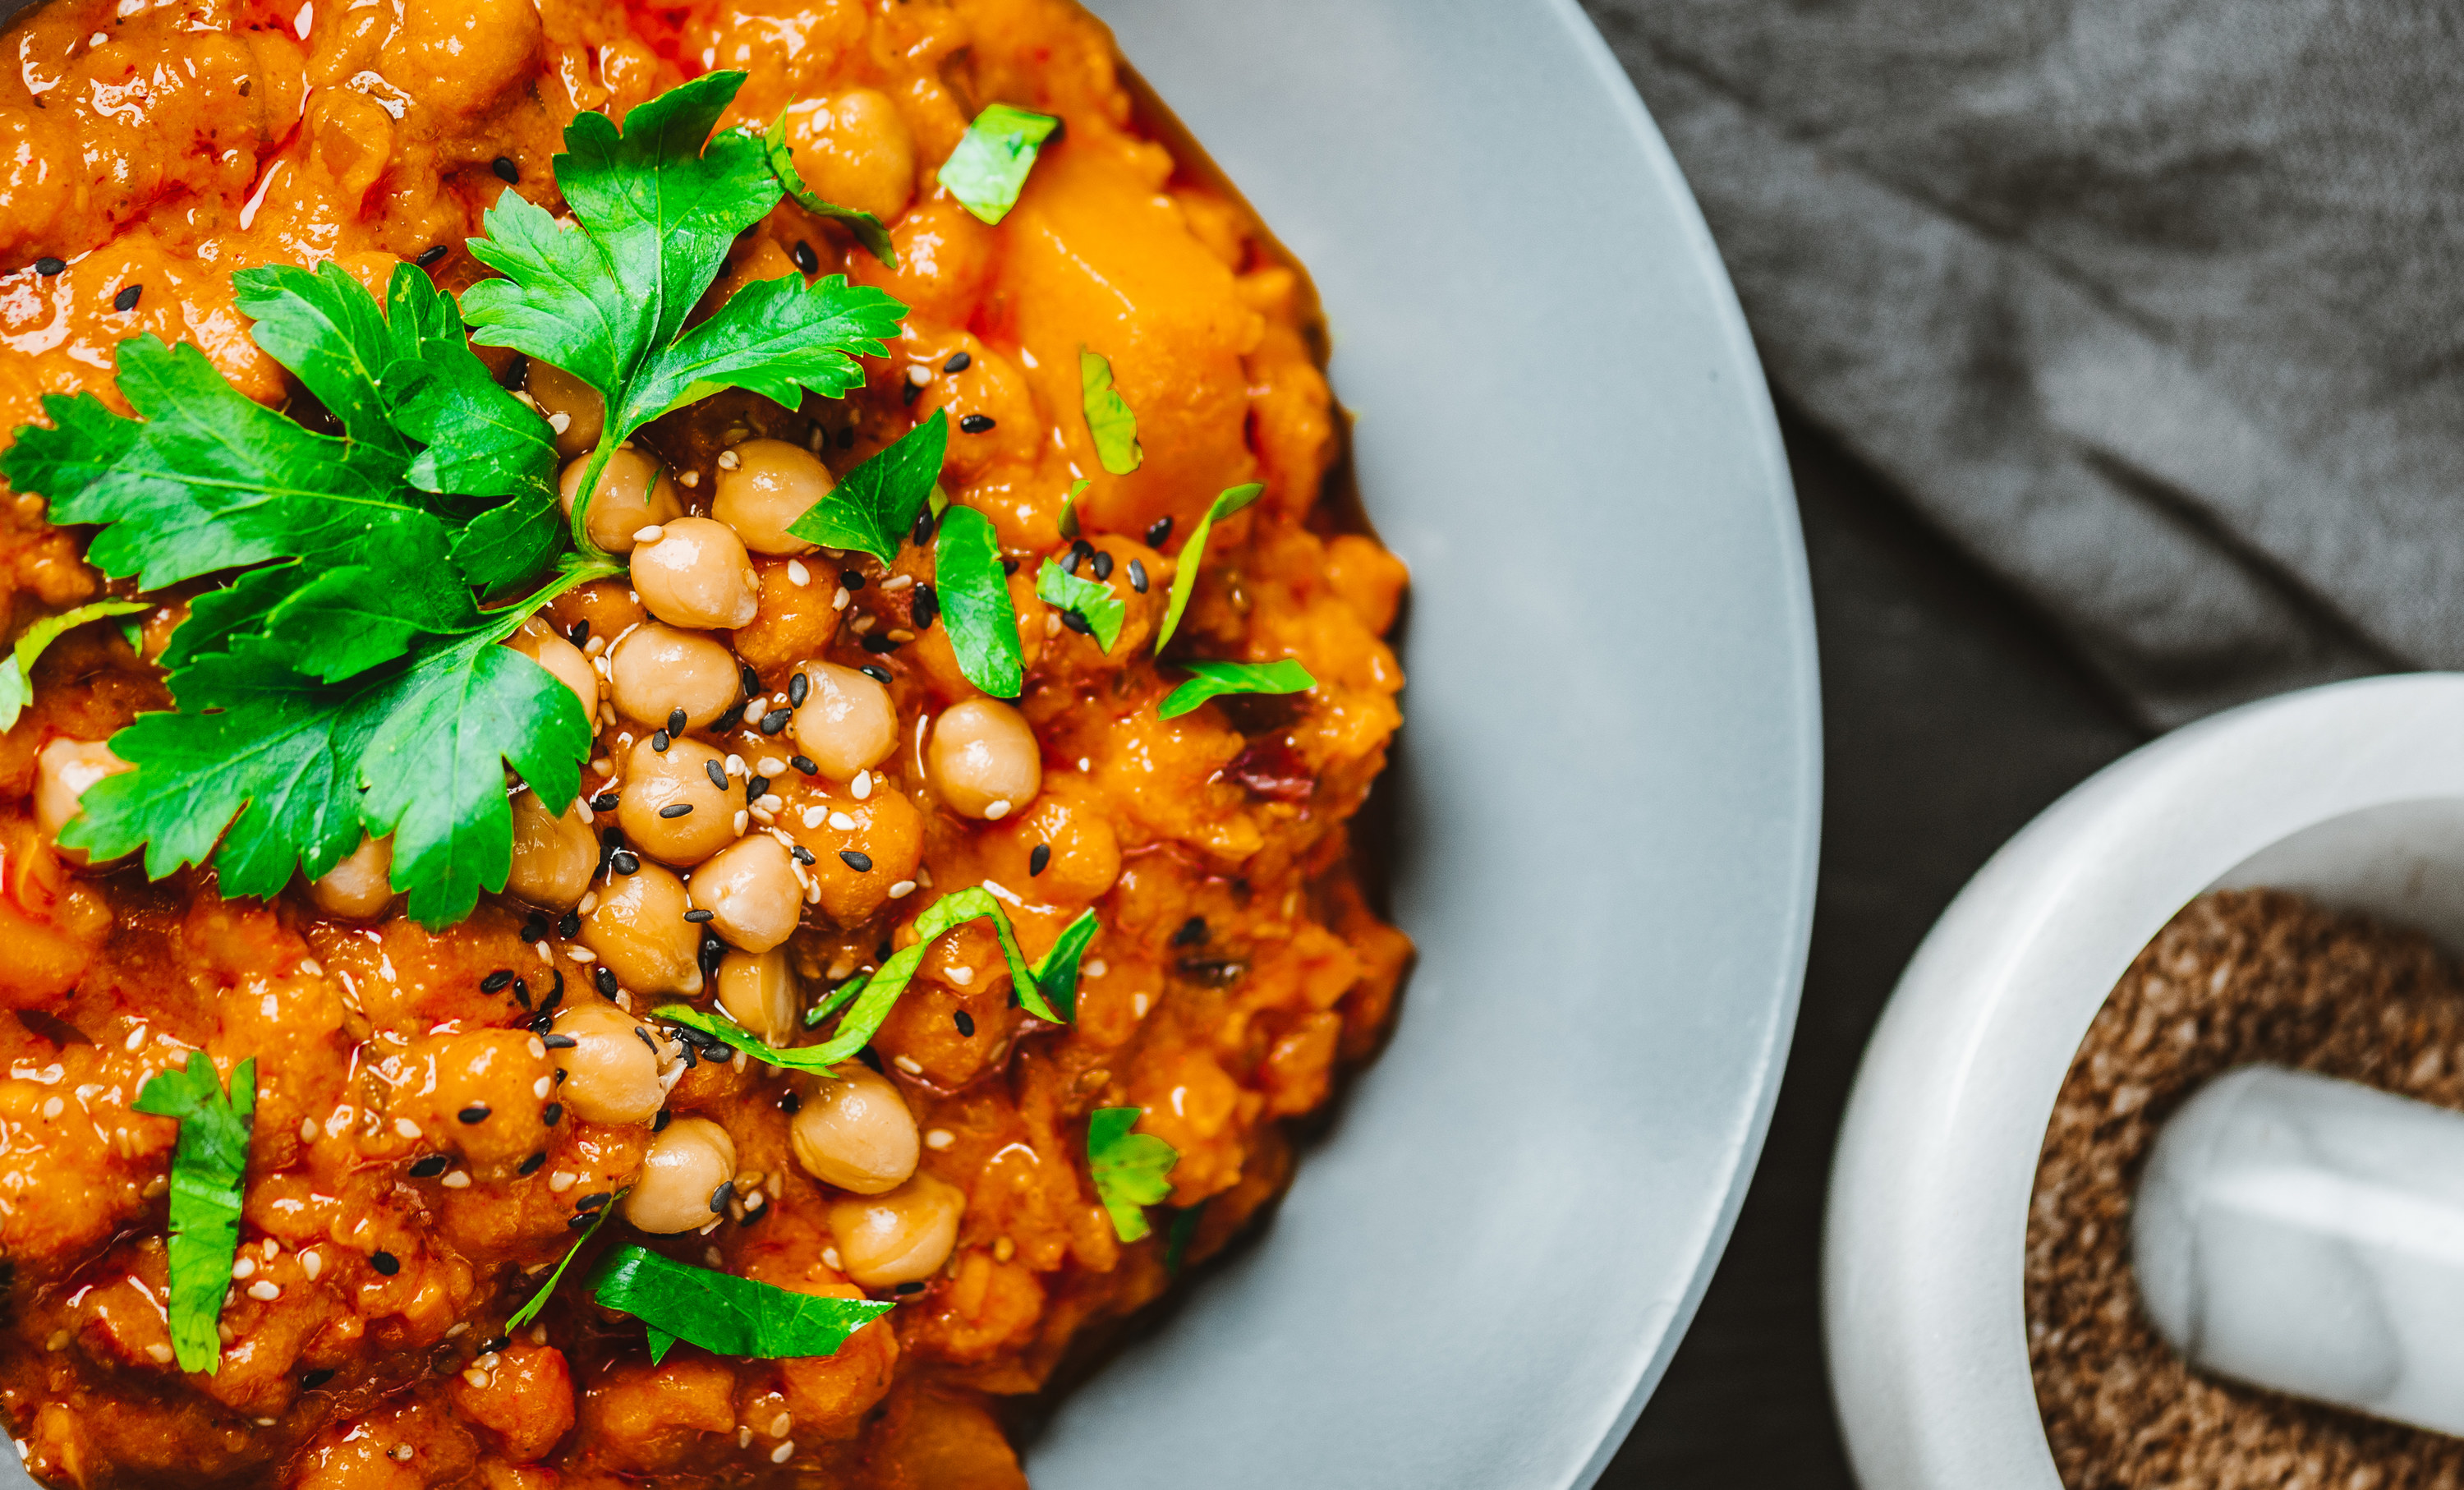 Chana masala is topped with cilantro and served in a white bowl